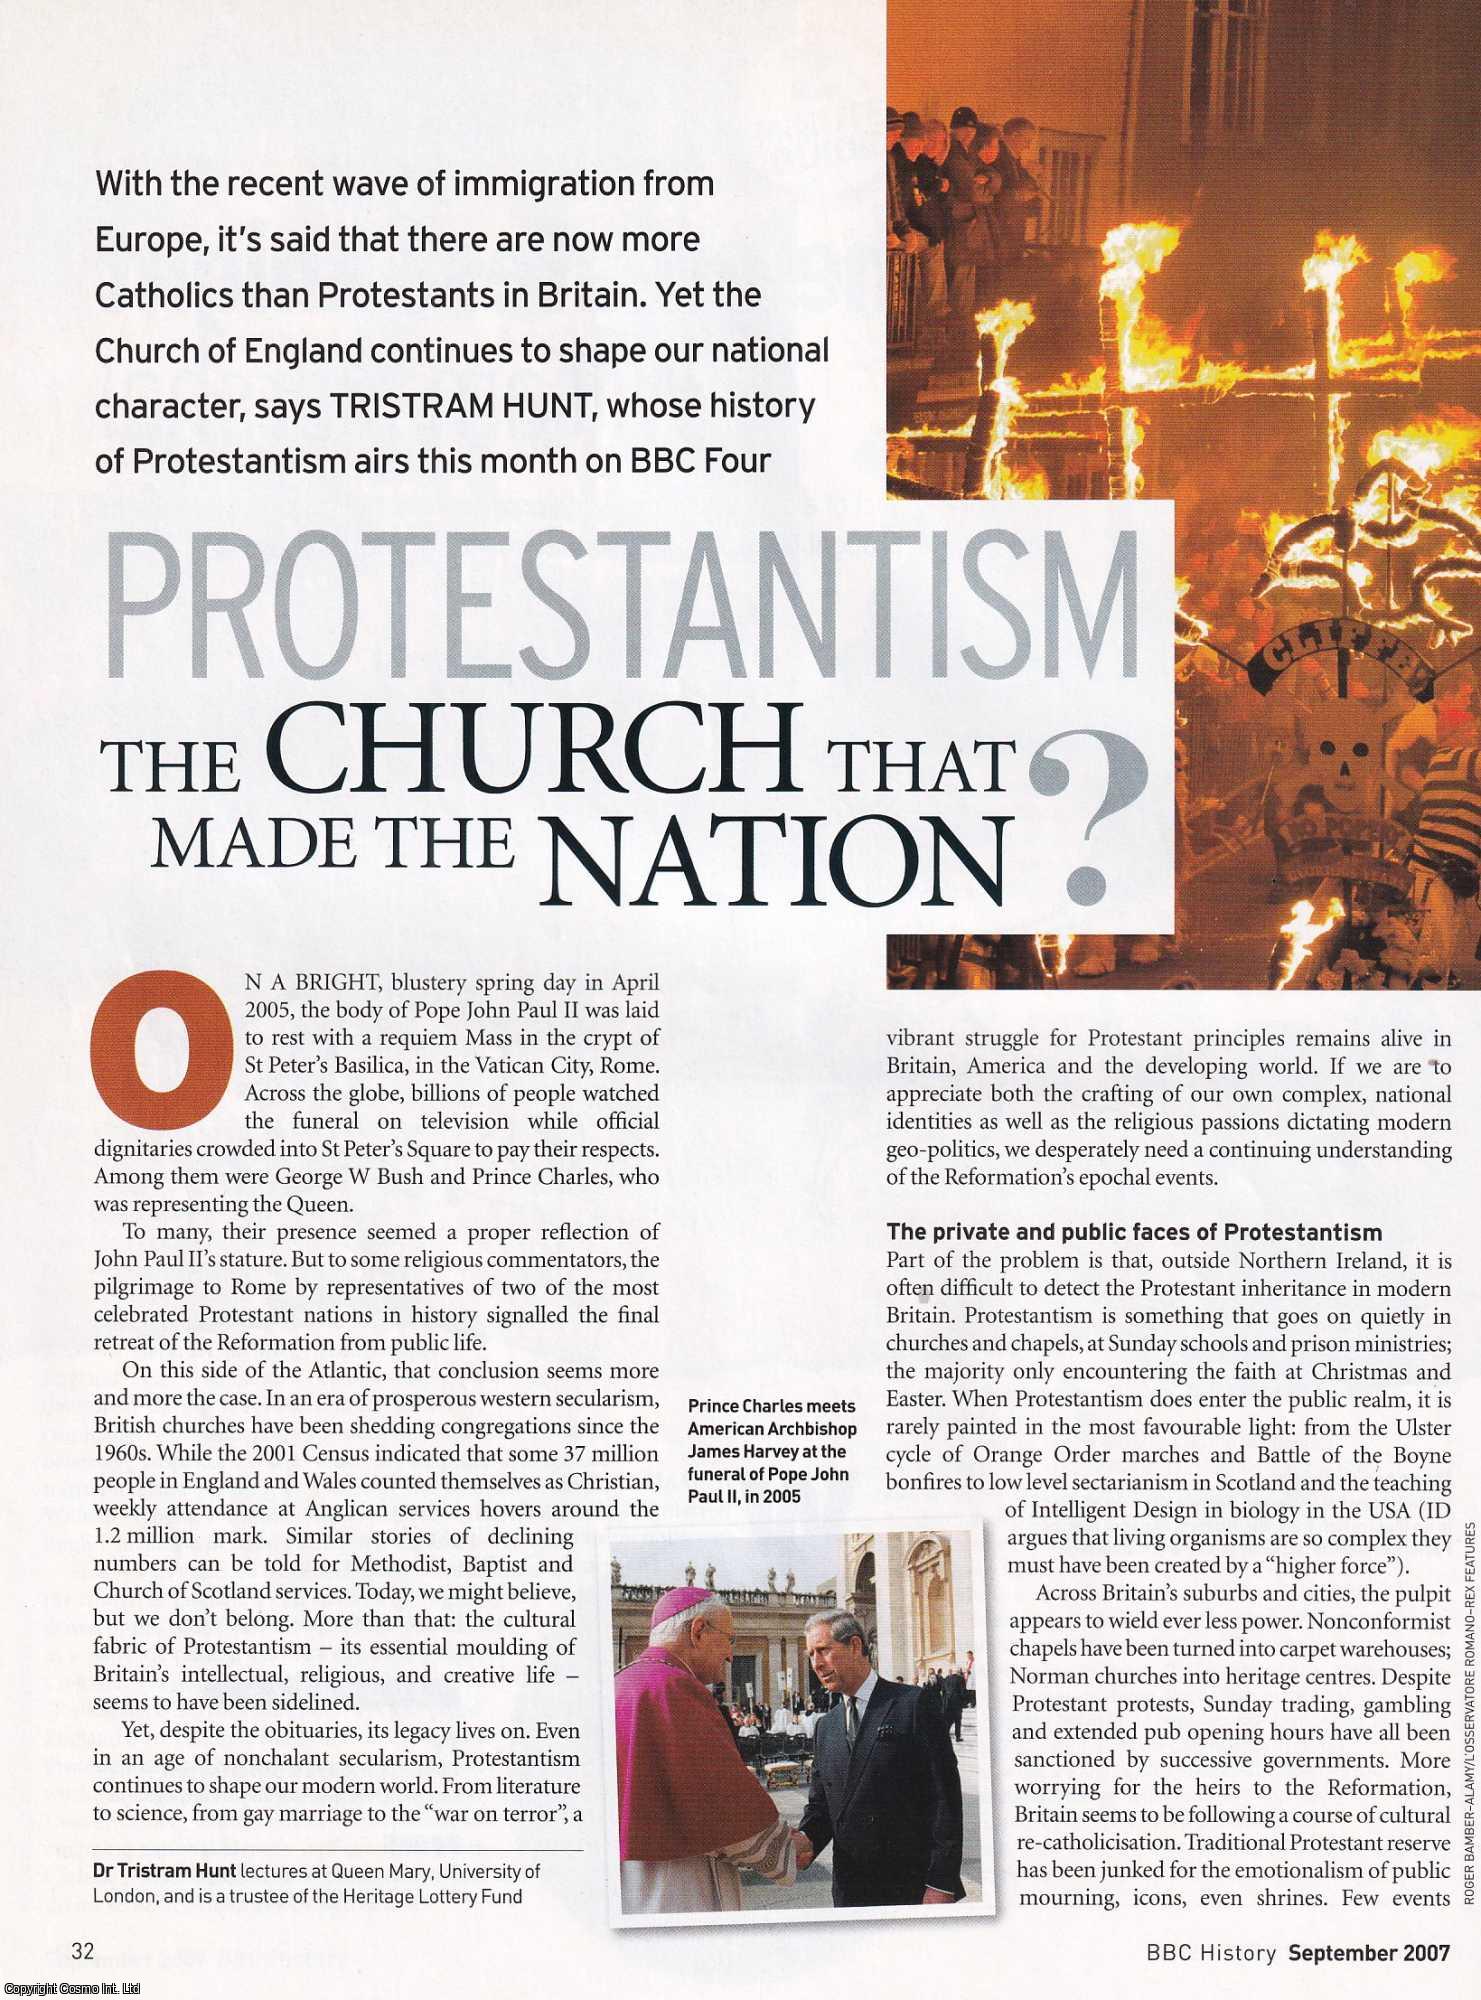 Tristram Hunt - Protestantism, the Church that Made the Nation? An original article from BBC History Magazine, 2007.